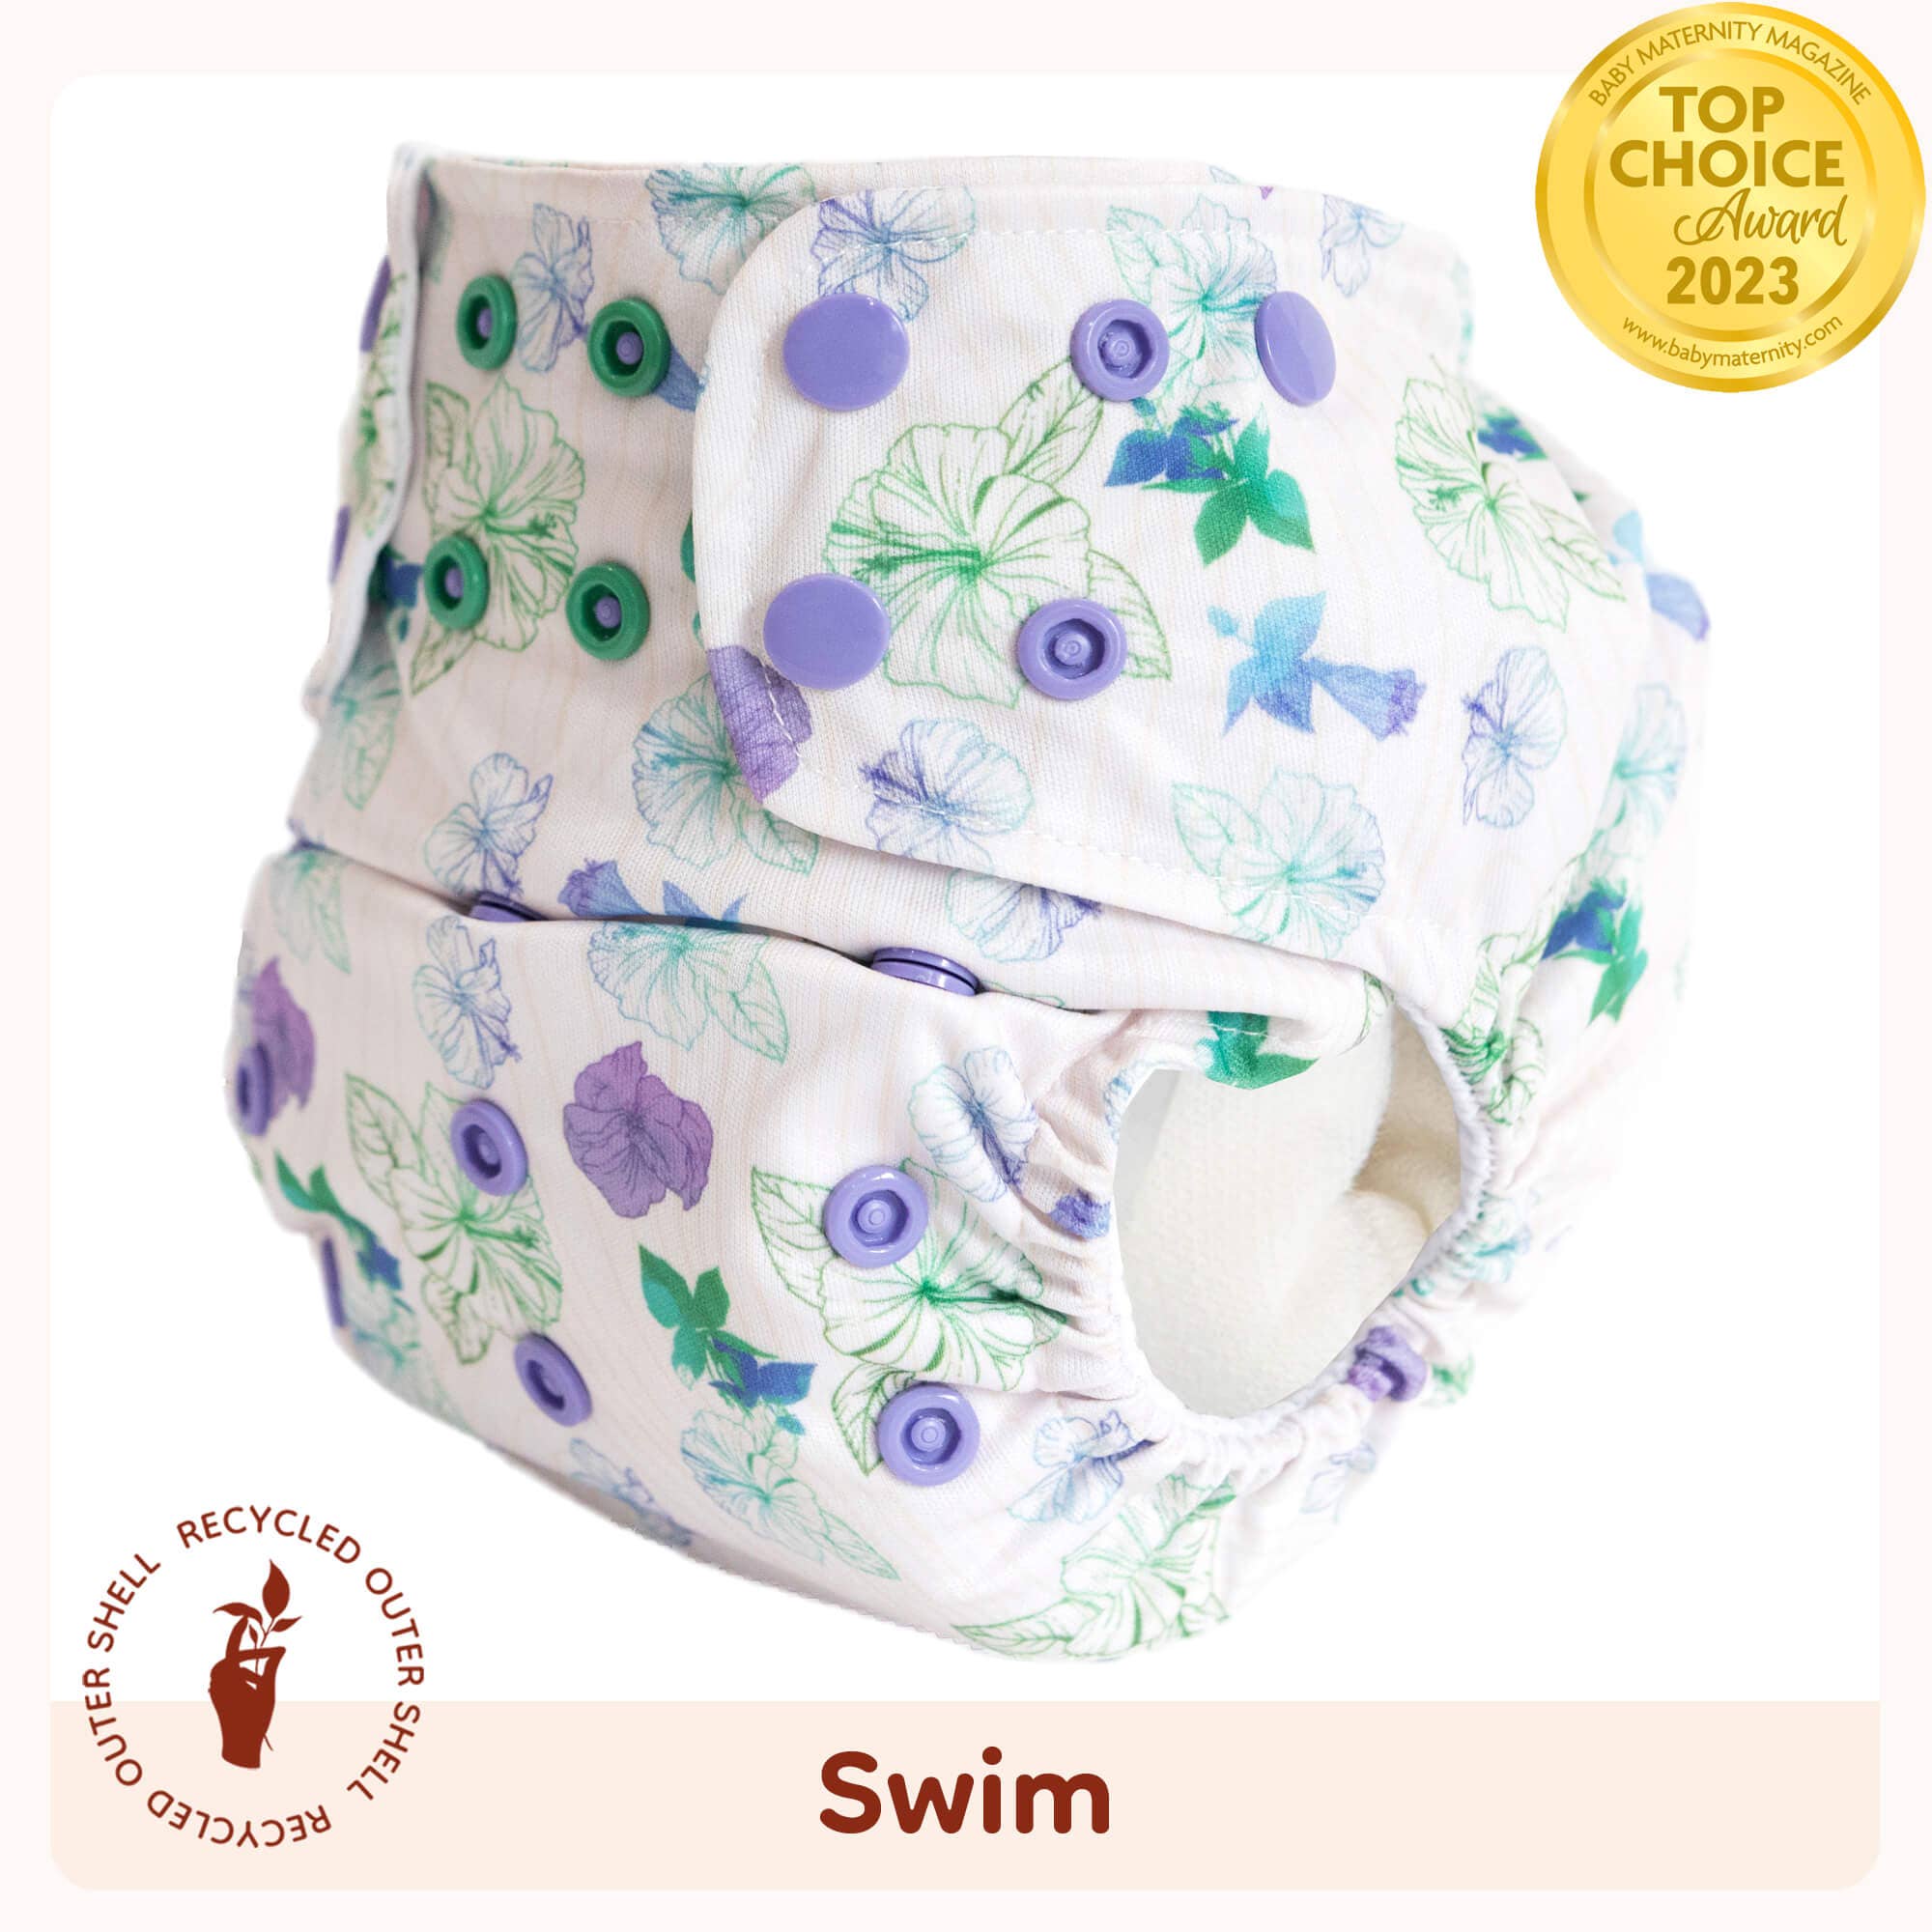 Purchase Wholesale diaper cover. Free Returns & Net 60 Terms on Faire